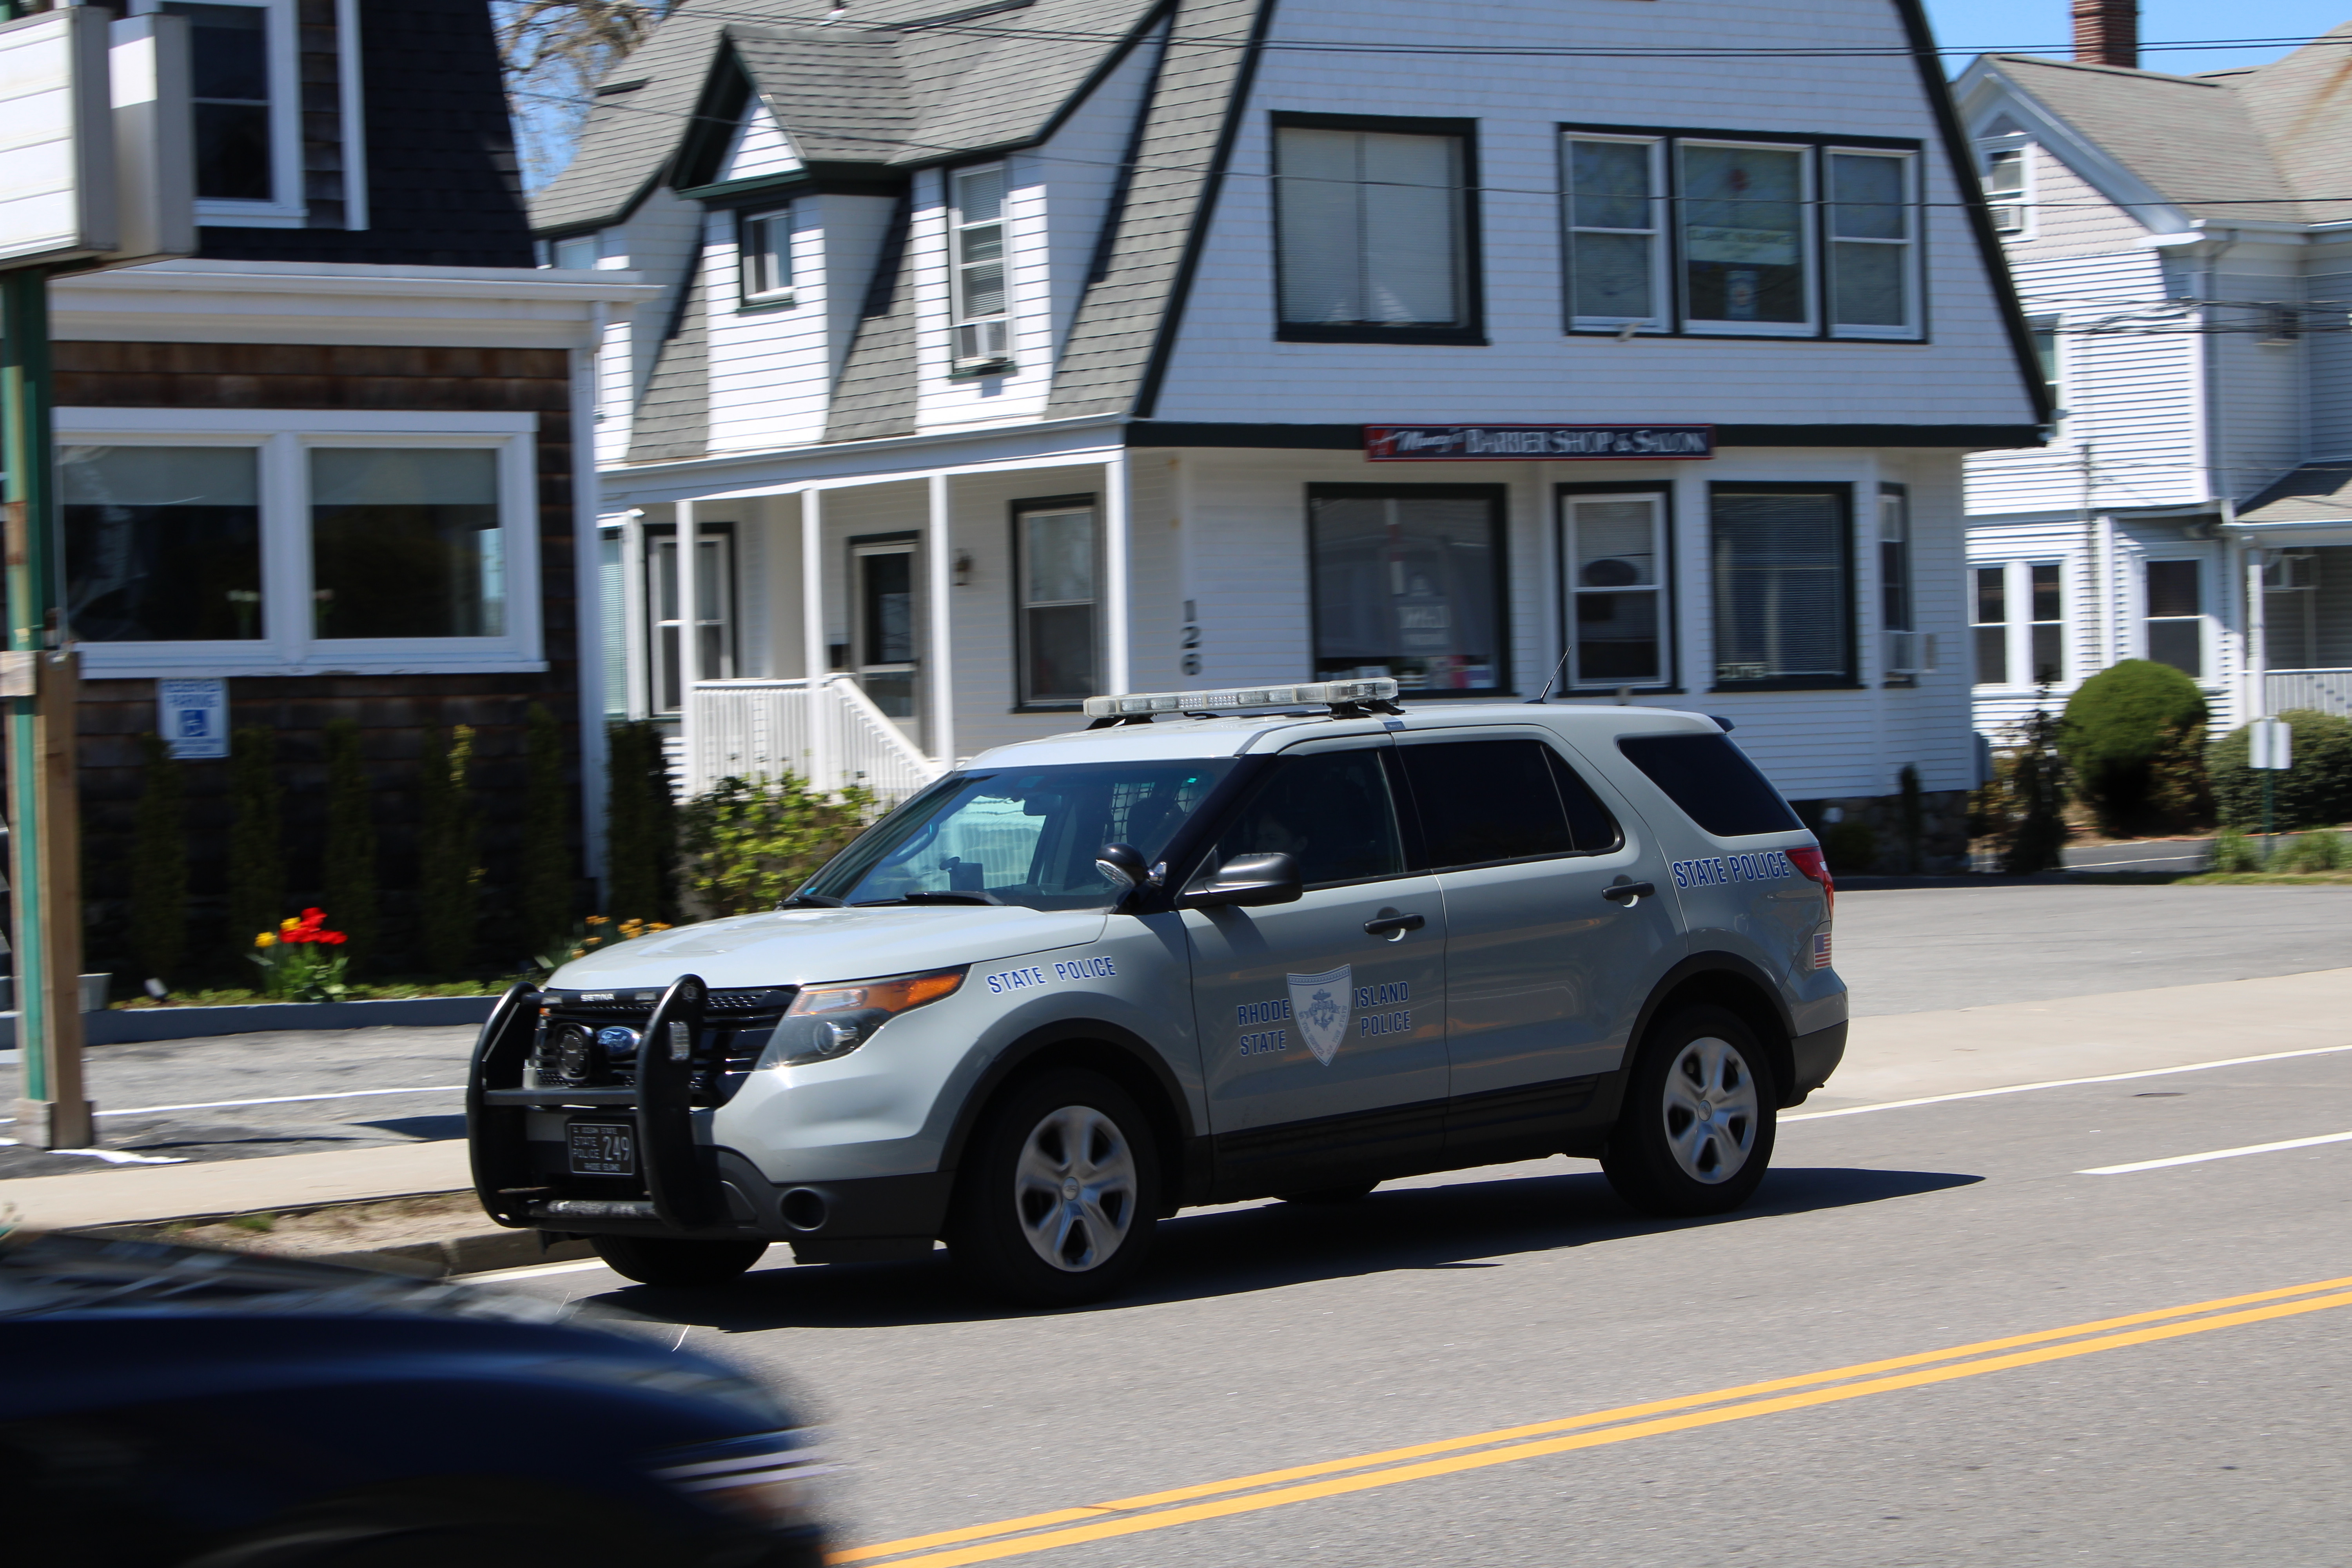 A photo  of Rhode Island State Police
            Cruiser 249, a 2013 Ford Police Interceptor Utility             taken by @riemergencyvehicles